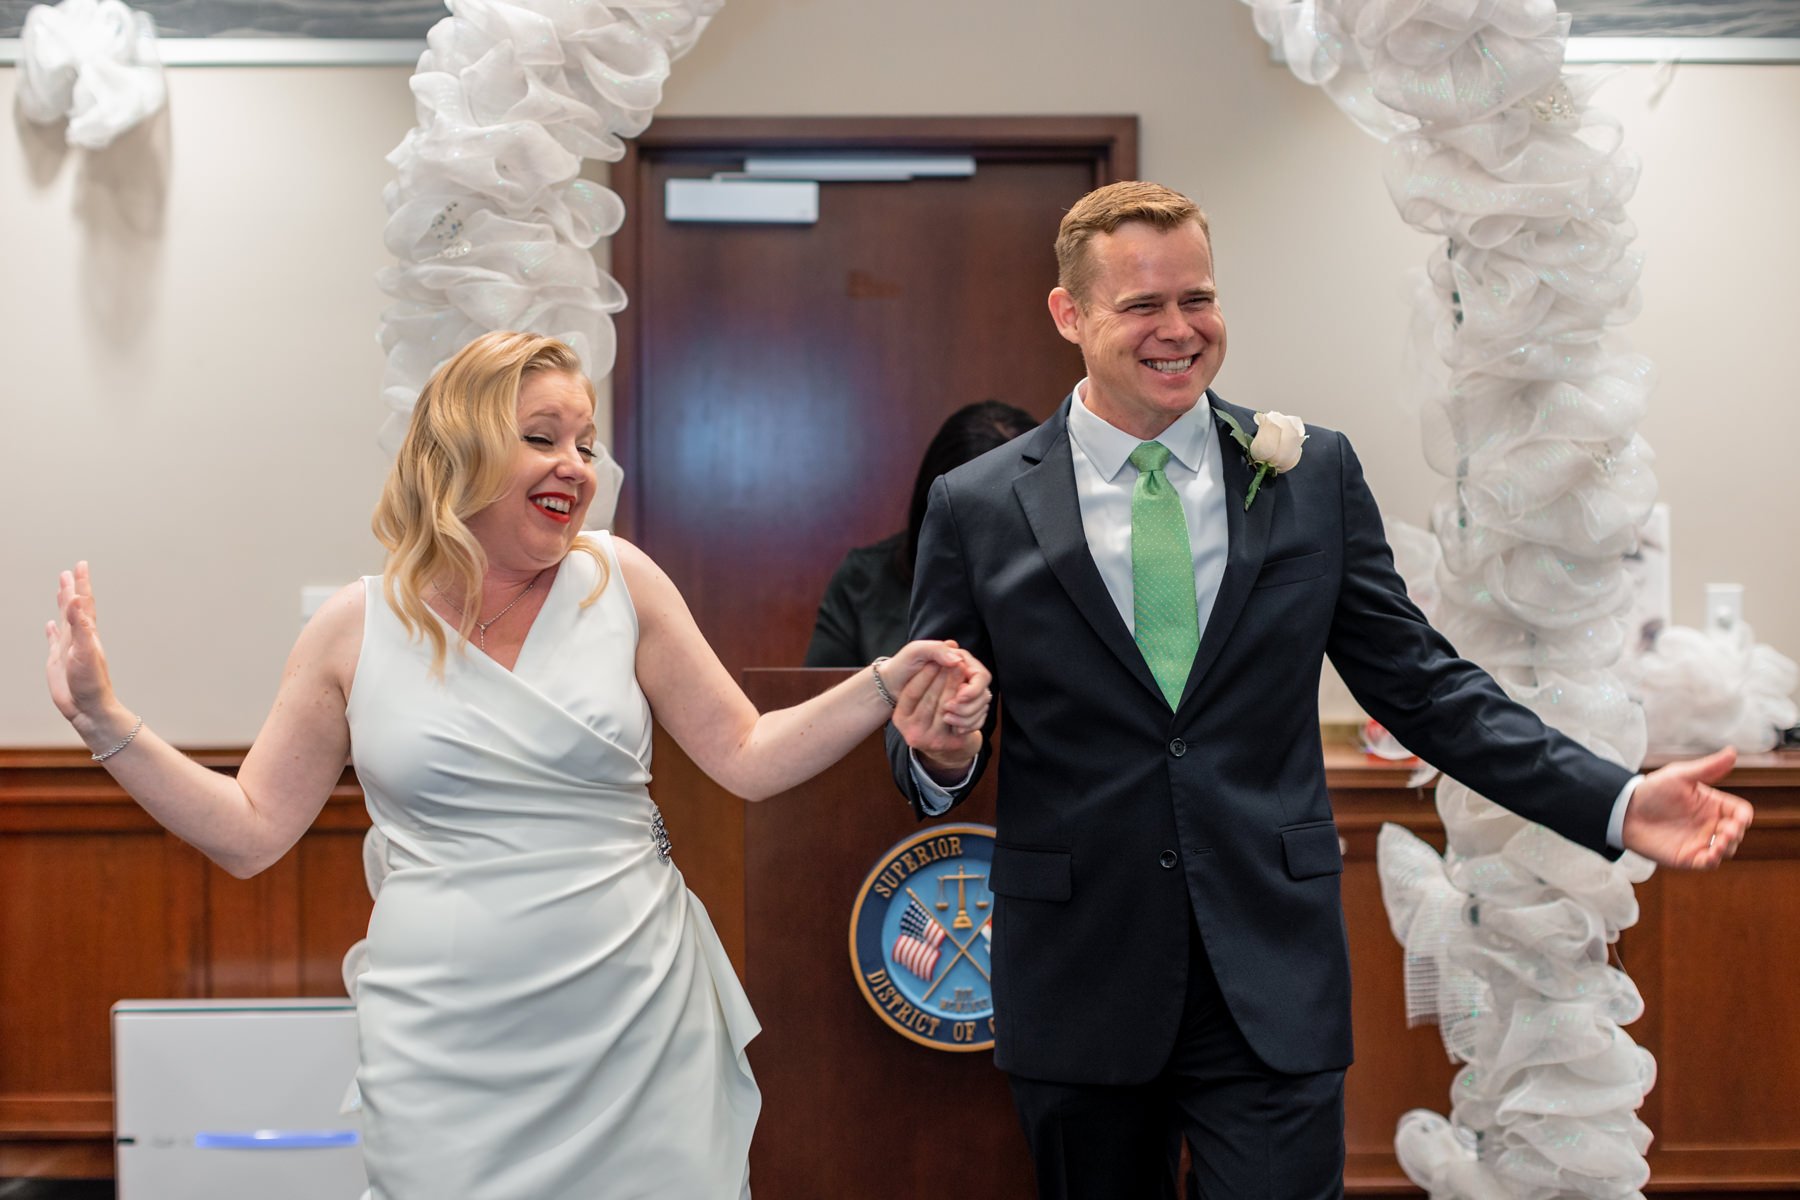 elopement-courthouse-dc-6.jpg